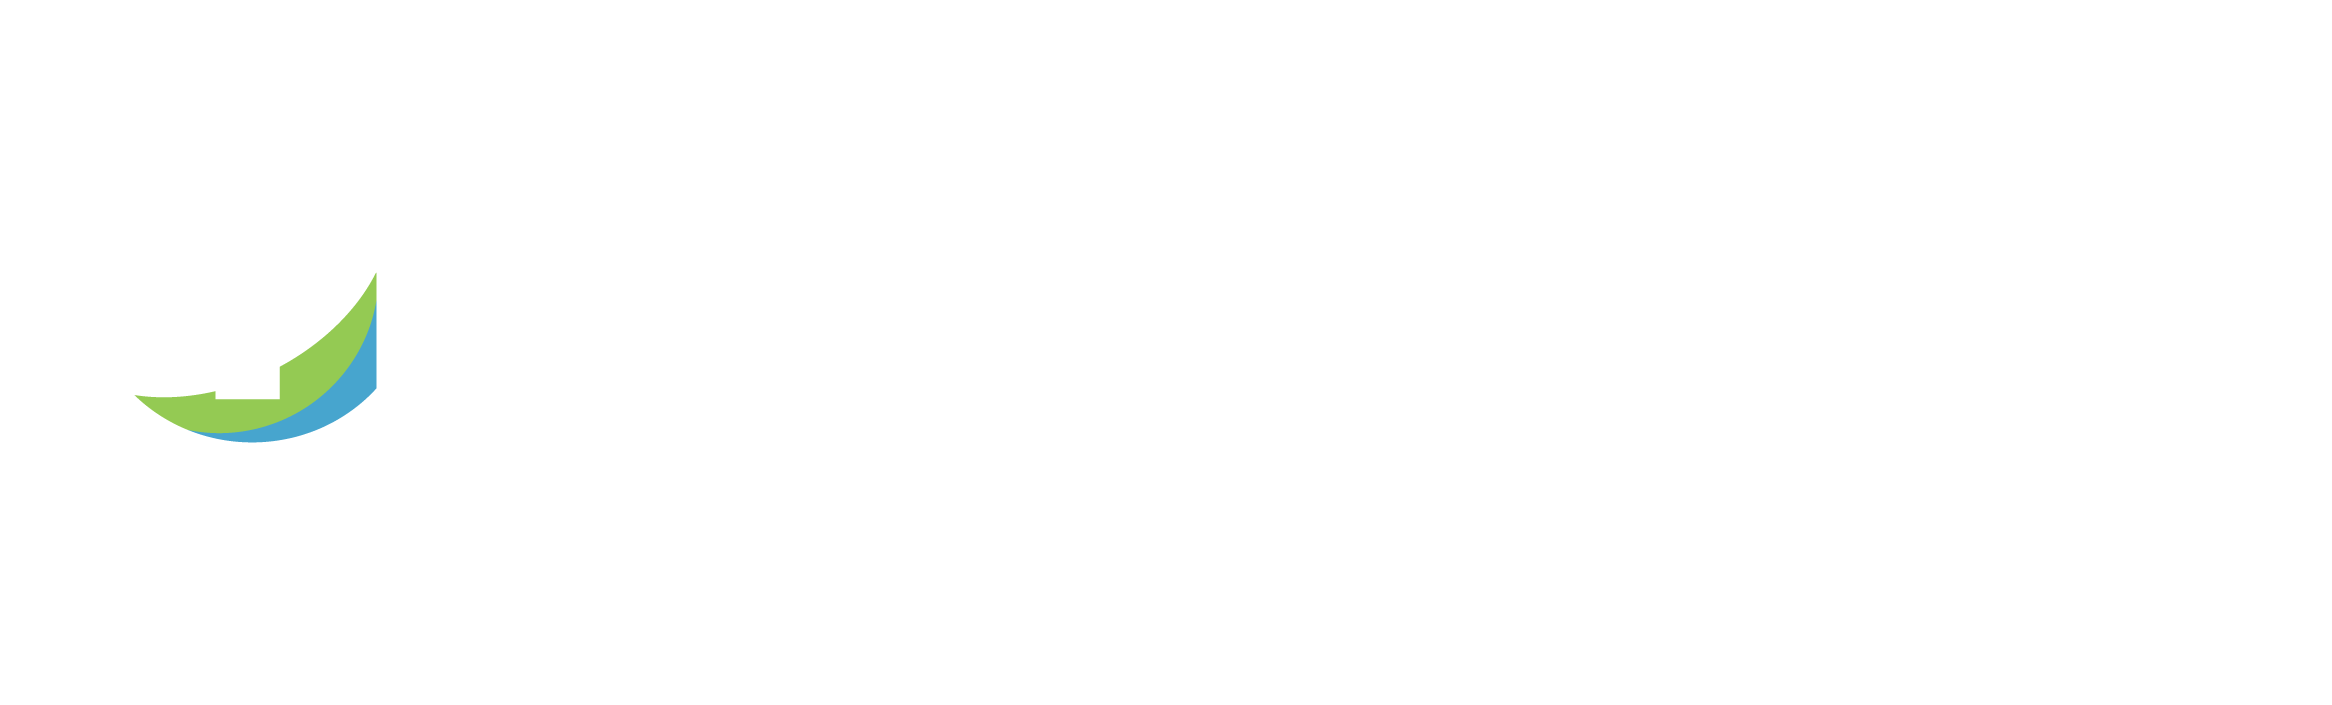 iTransplant - Software that Empowers Heroes - logo - white - v4